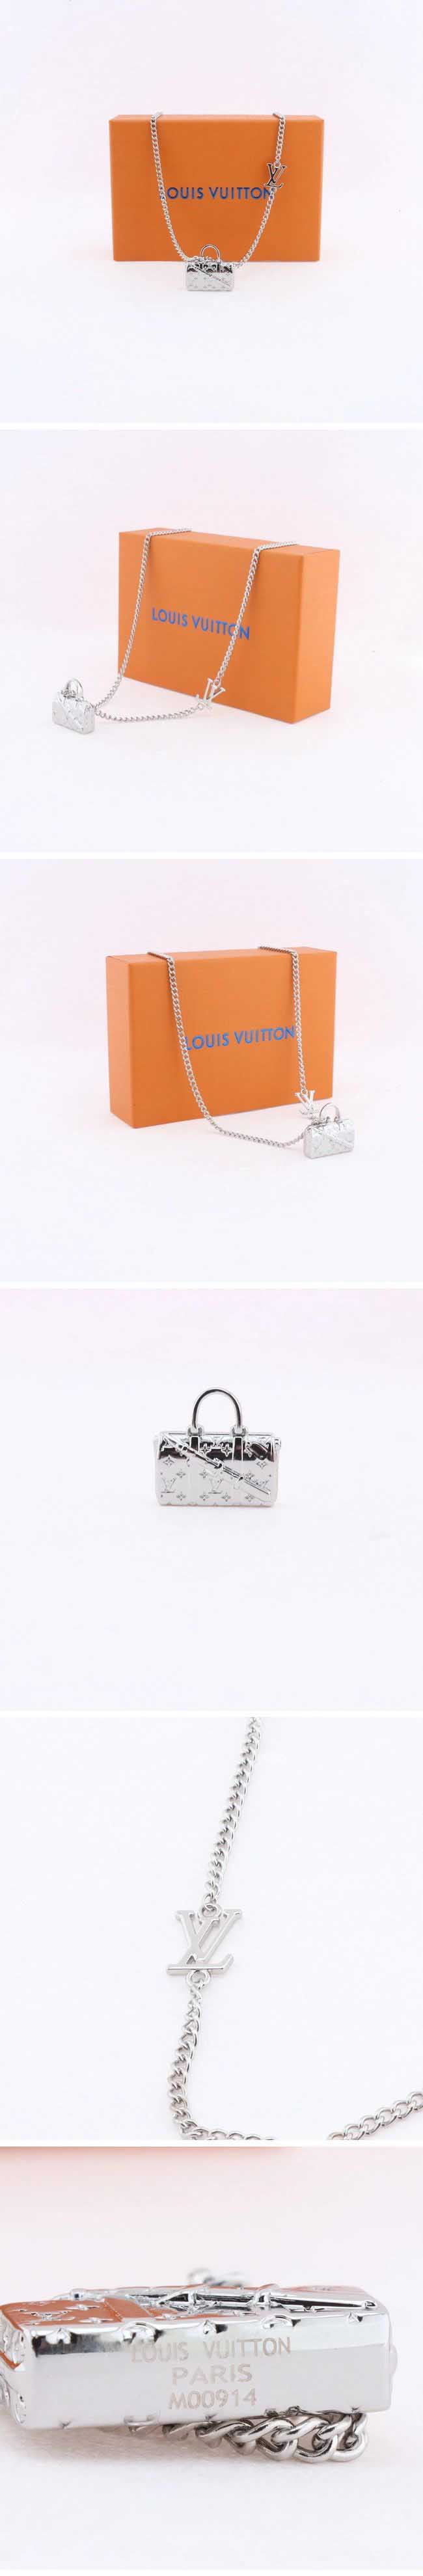 Louis Vuitton Boston Bag Charm Necklace ルイヴィトン ボストンバッグ チャーム ネックレス